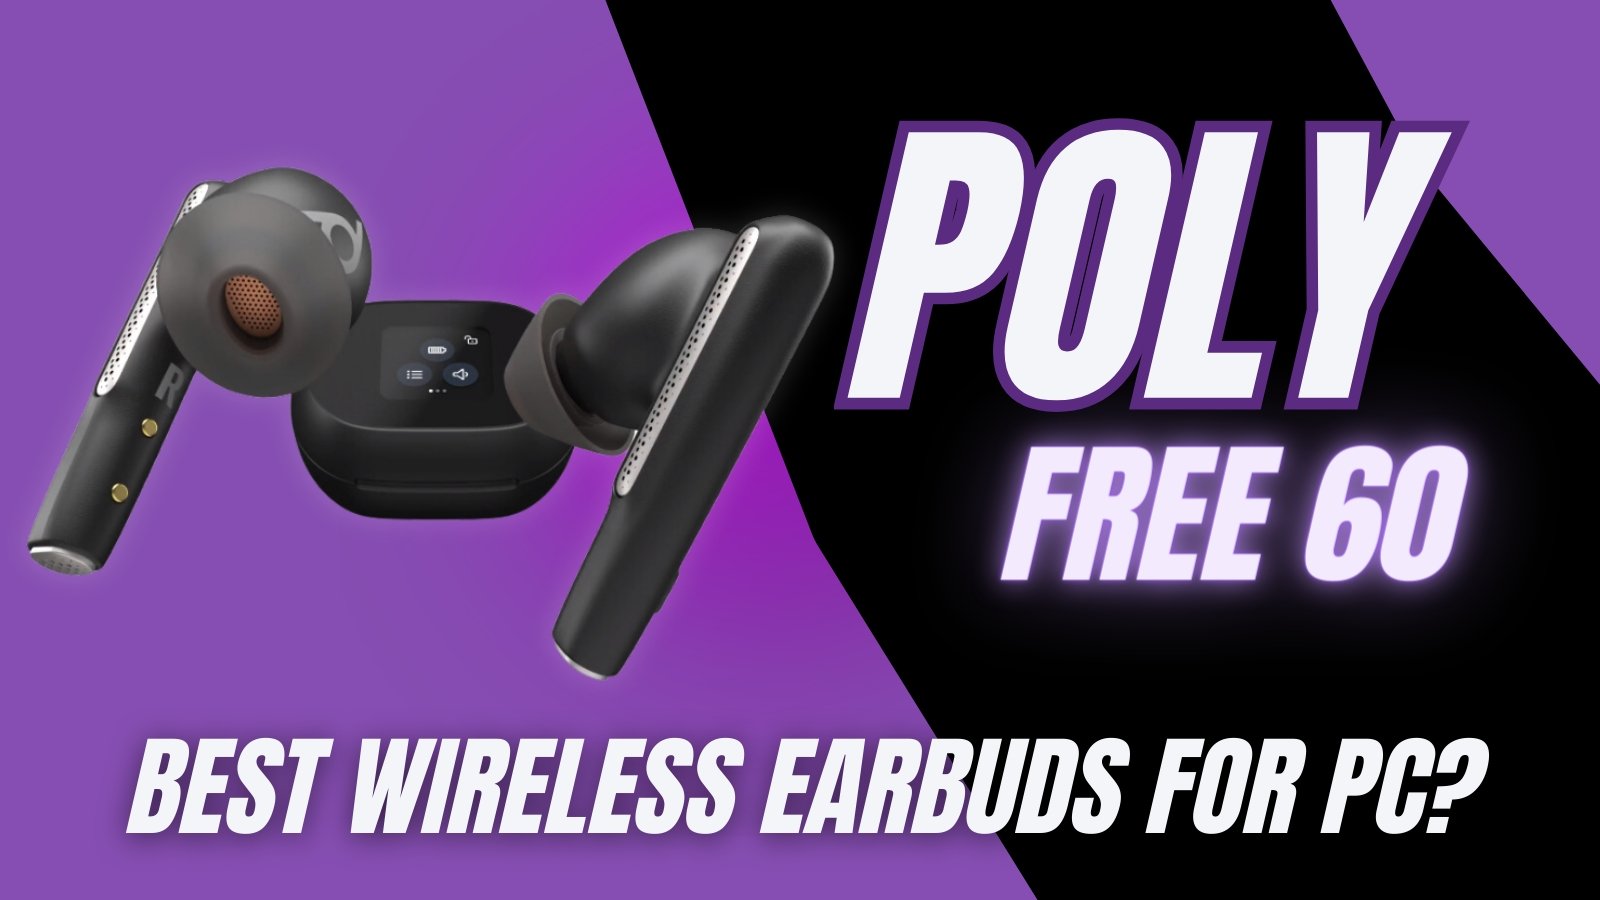 Are The For Best Earbuds 60 Free PC? The Poly Voyager